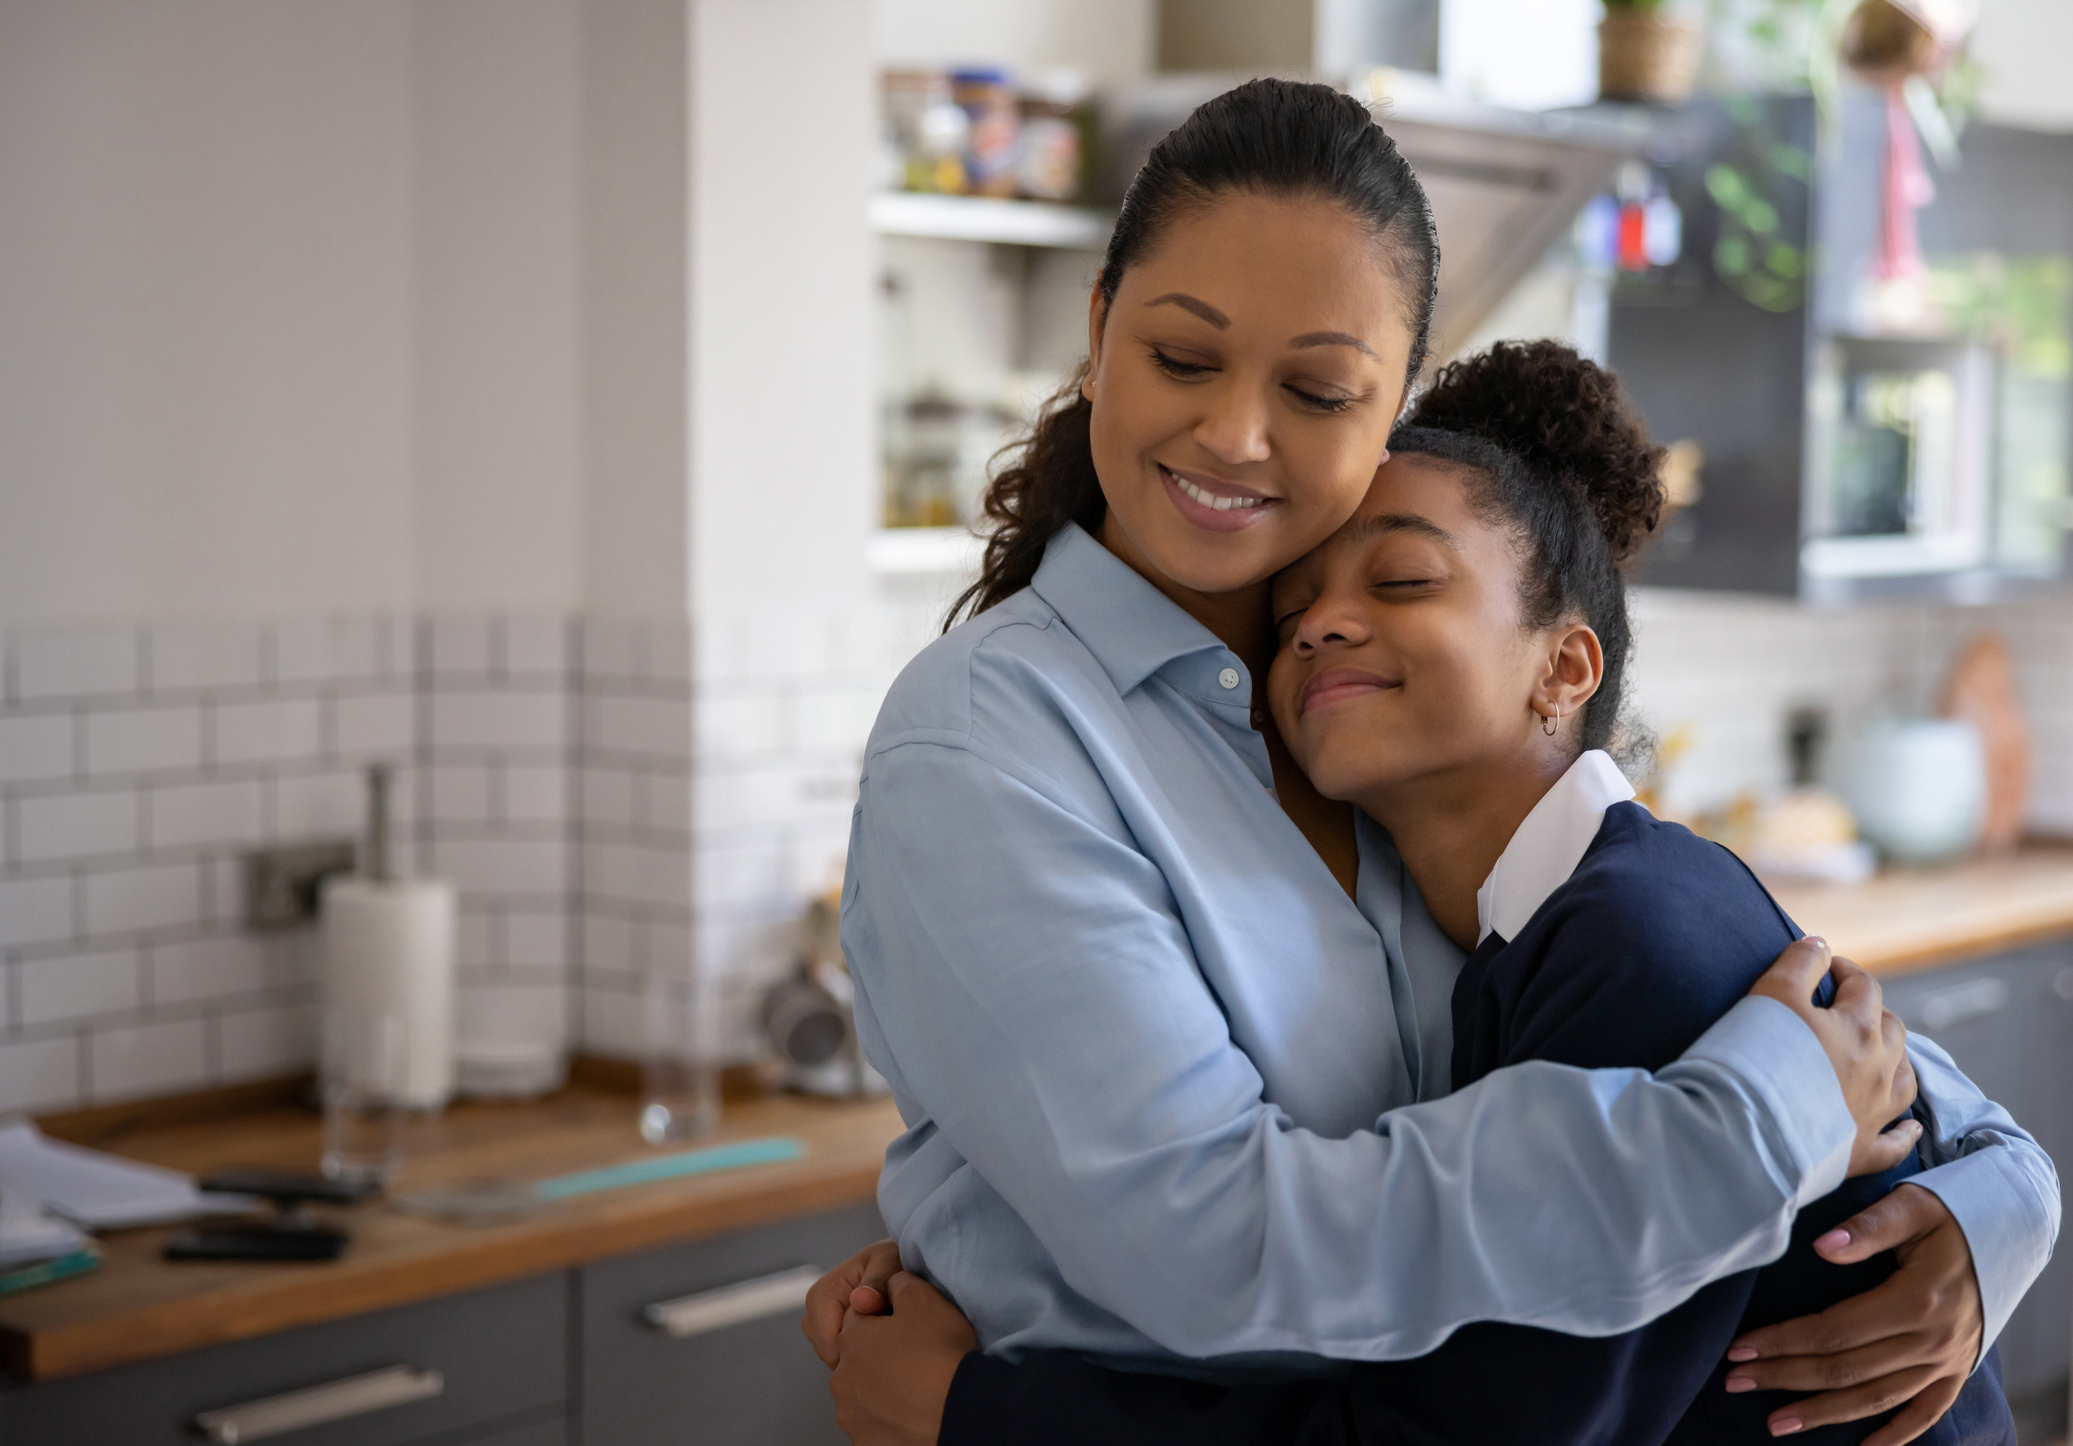 Woman embracing child in kitchen, both smiling, conveying a warm, nurturing moment